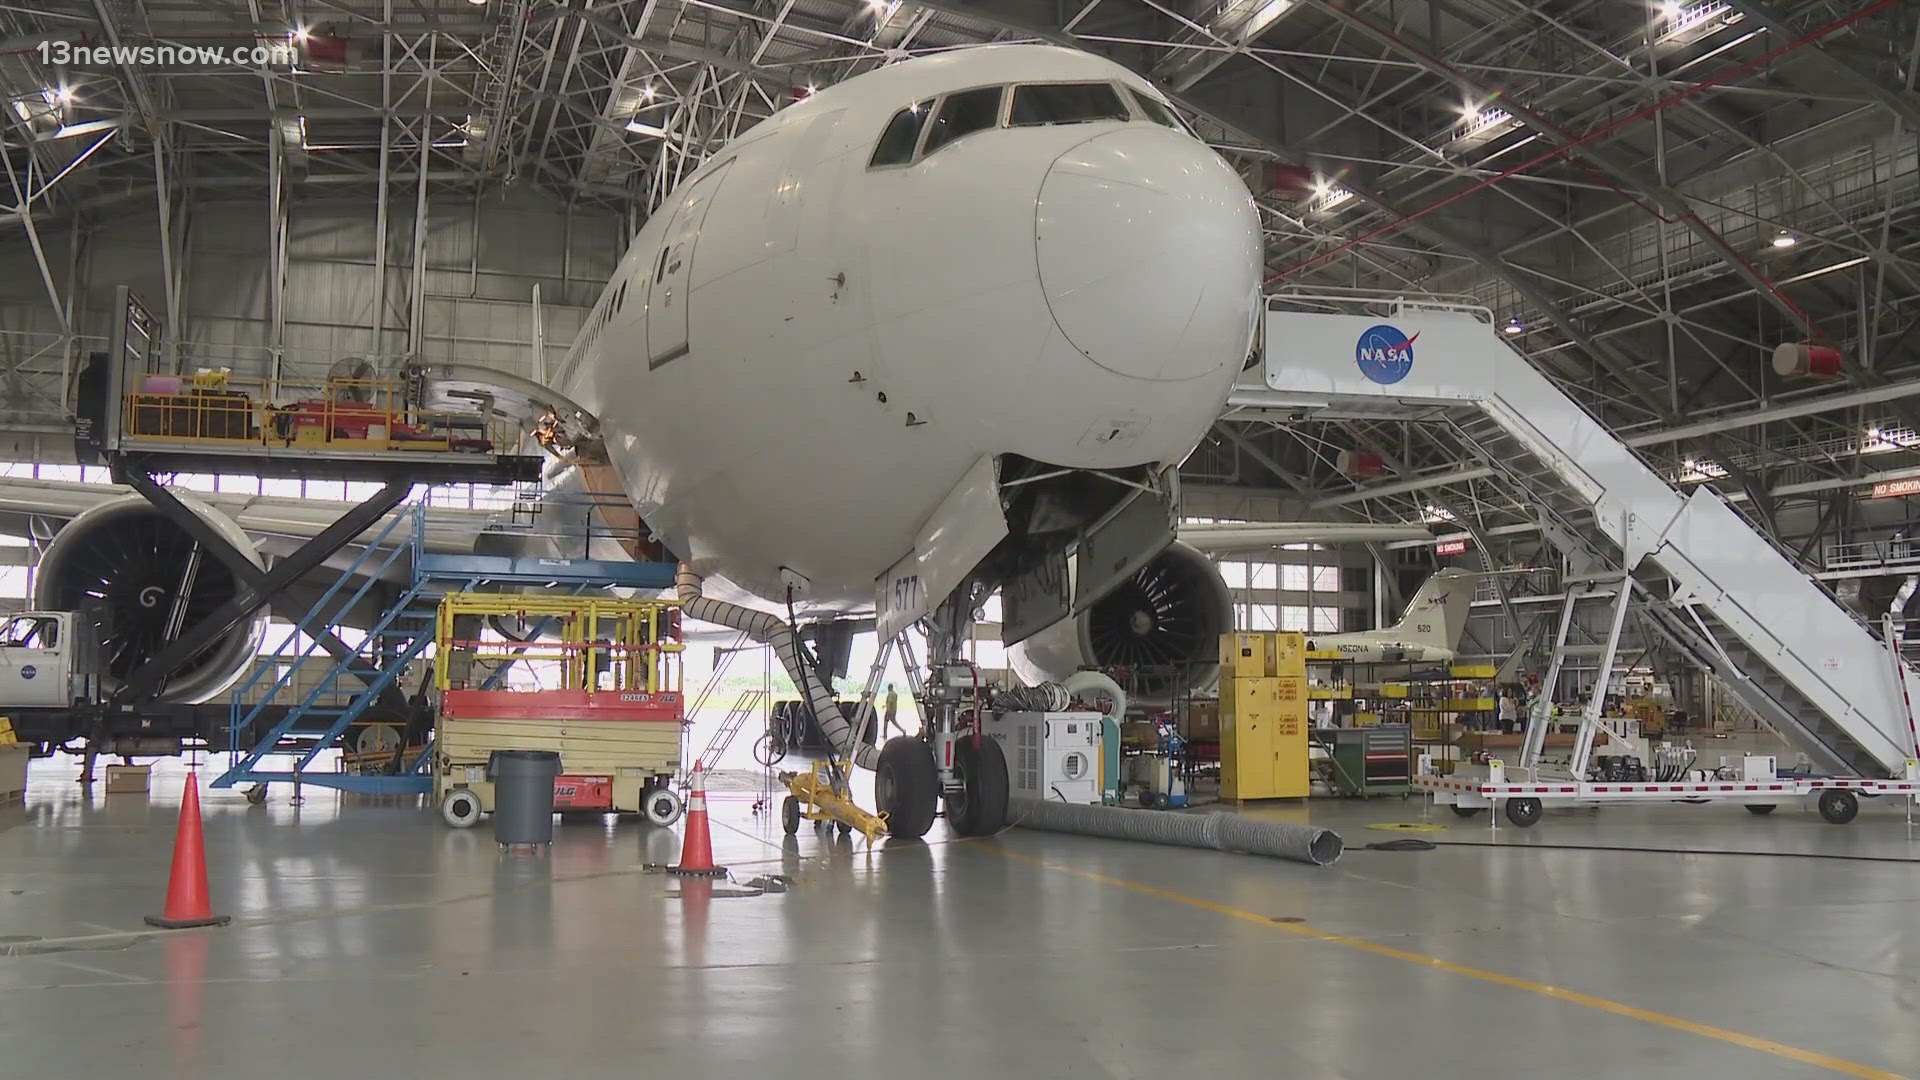 NASA is converting a former passenger jet into a flying lab at the Langley Research Center in Hampton.